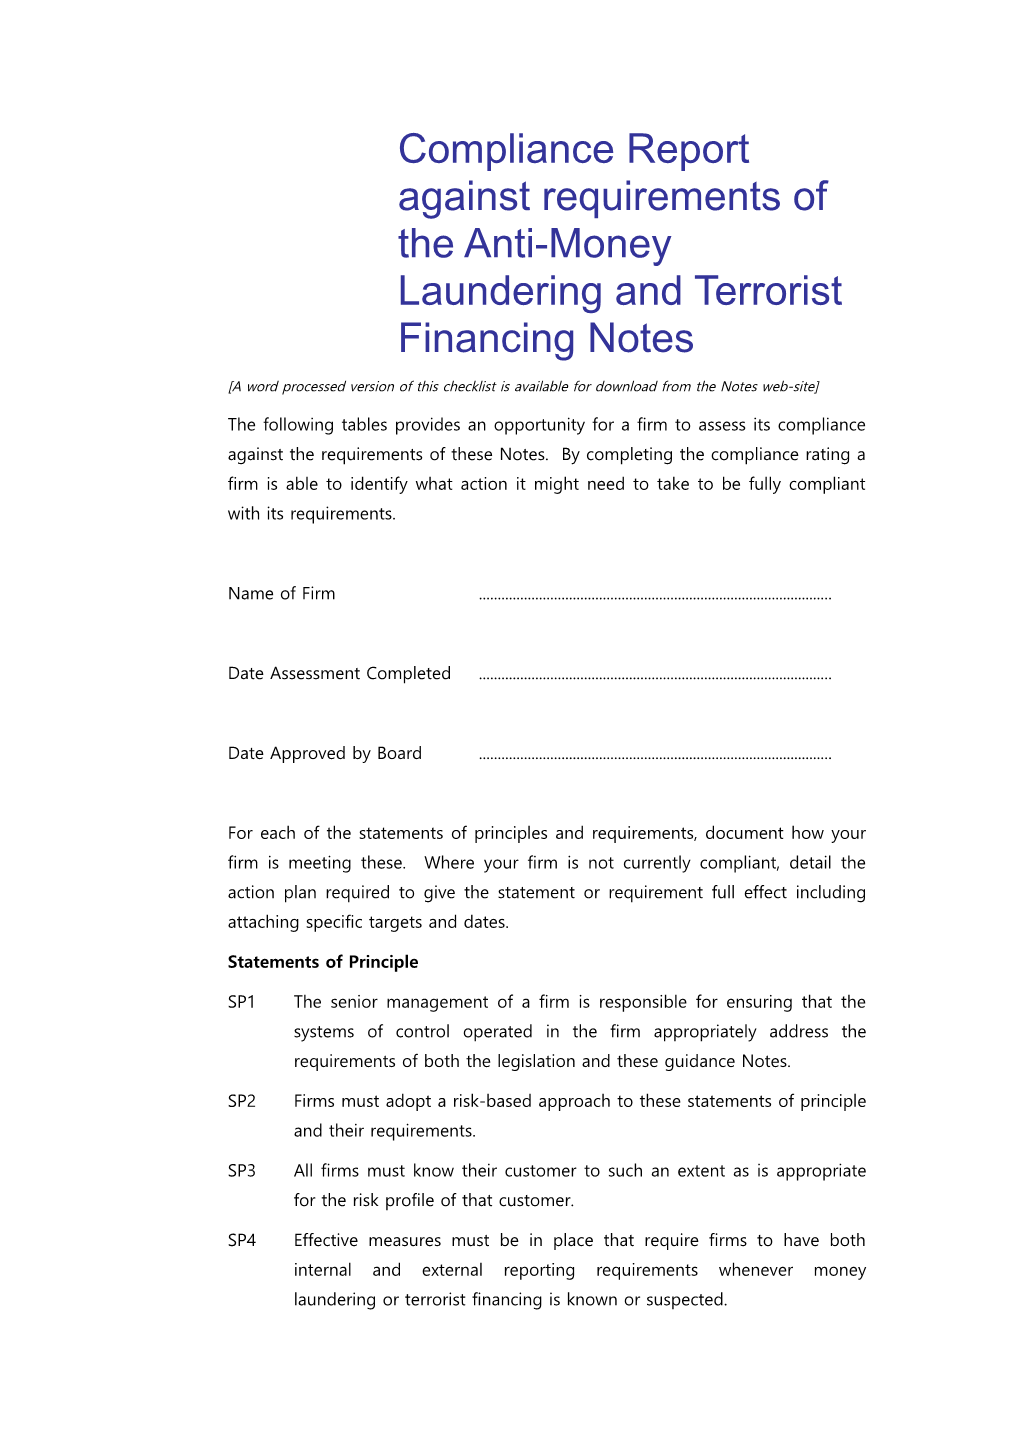 Compliance Report Against Requirements of These Anti-Money Laundering and Terrorist Financing